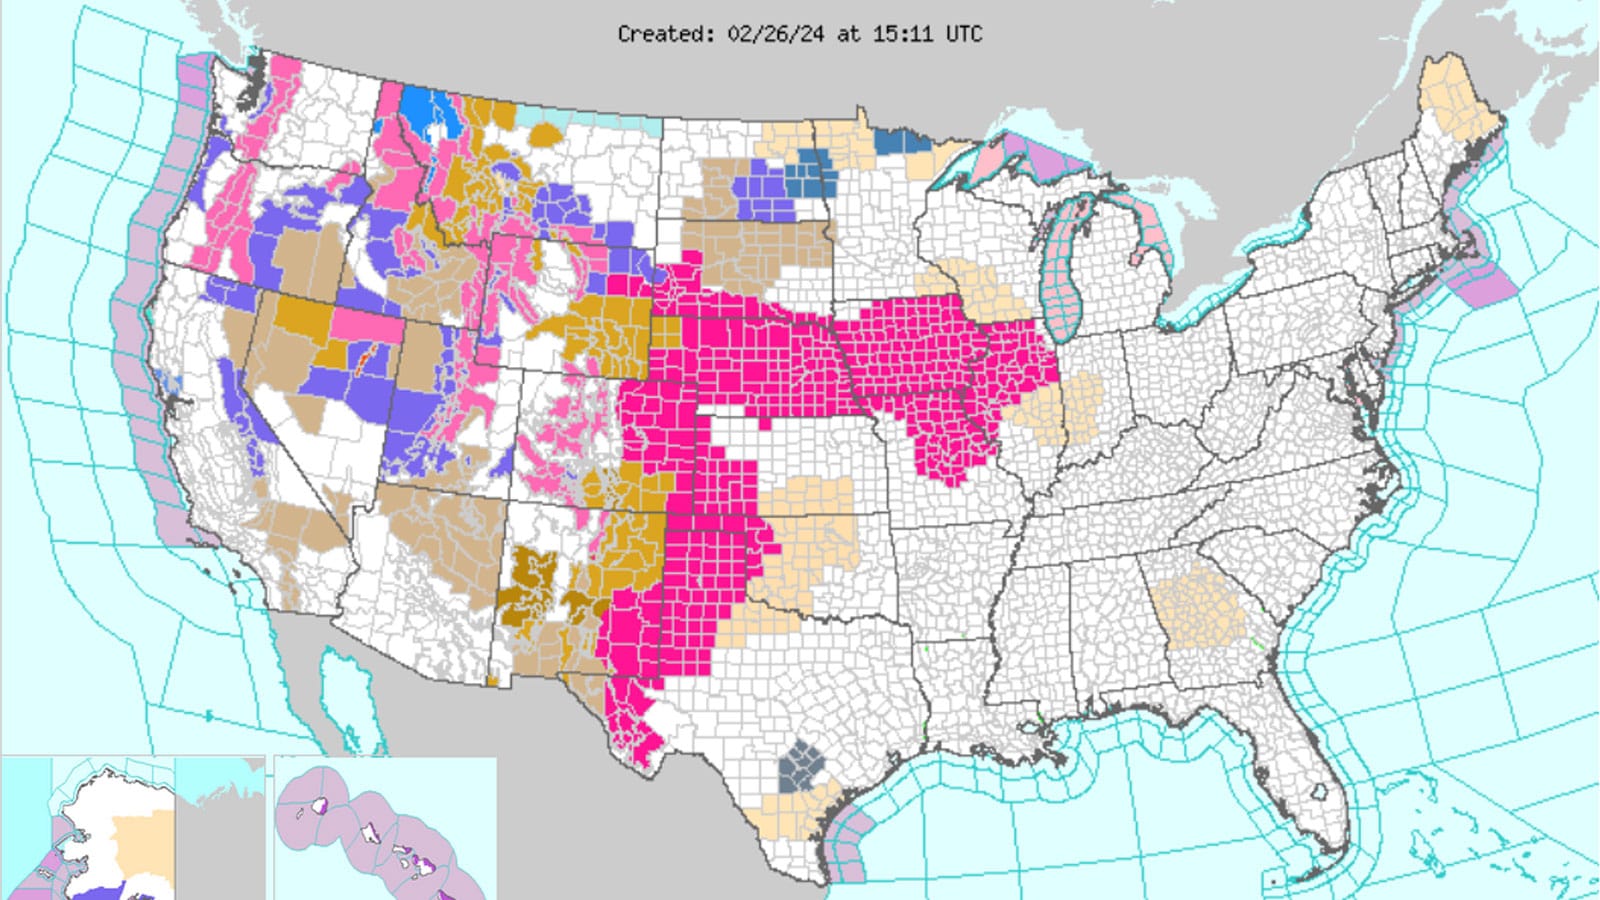 Colorful U.S. National Weather Service map, showing clickable regions offering detailed local forecasts